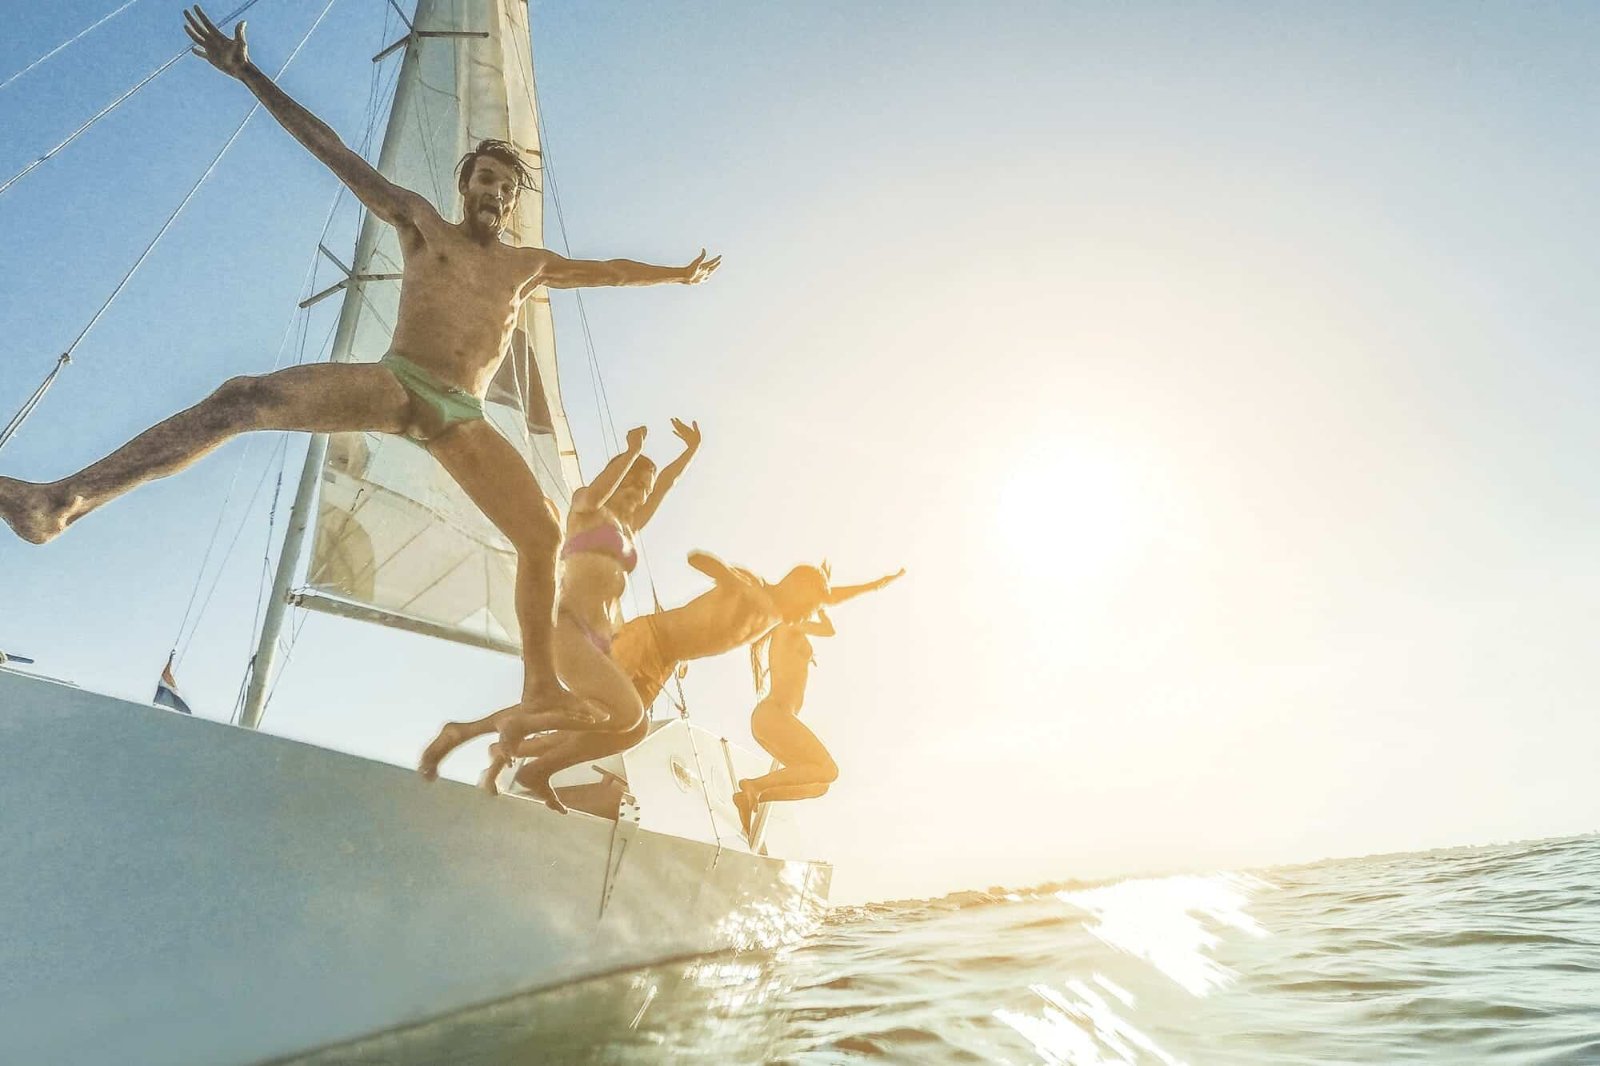 Friends diving into the sea off a boat